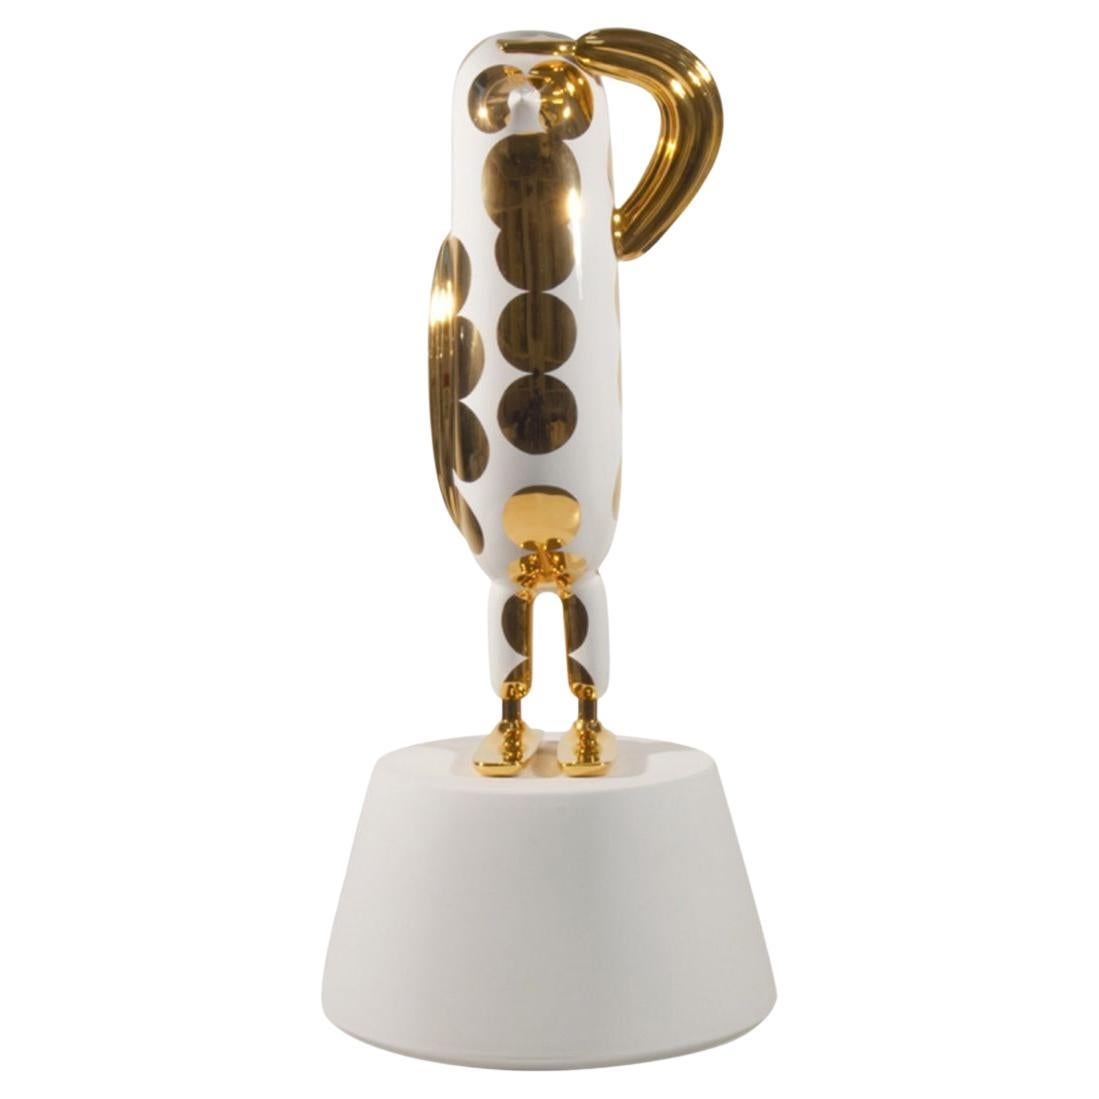 Hopebird Decoration 3 Glossy Gold and White by Bosa For Sale